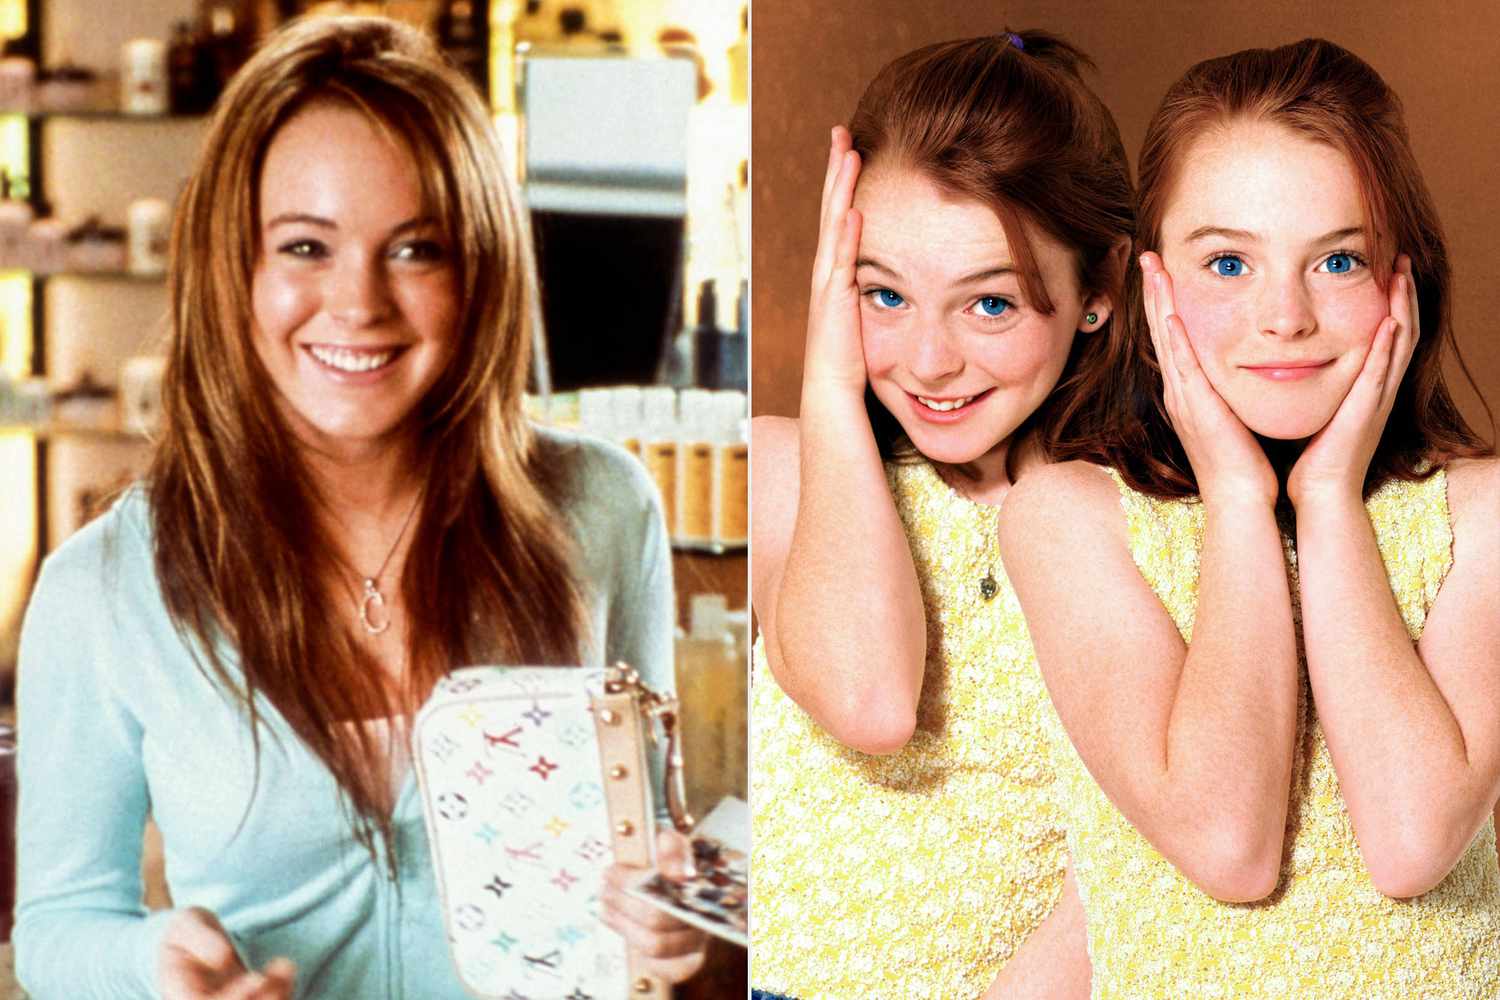 Lindsay Lohan in Mean Girls and The Parent Trap